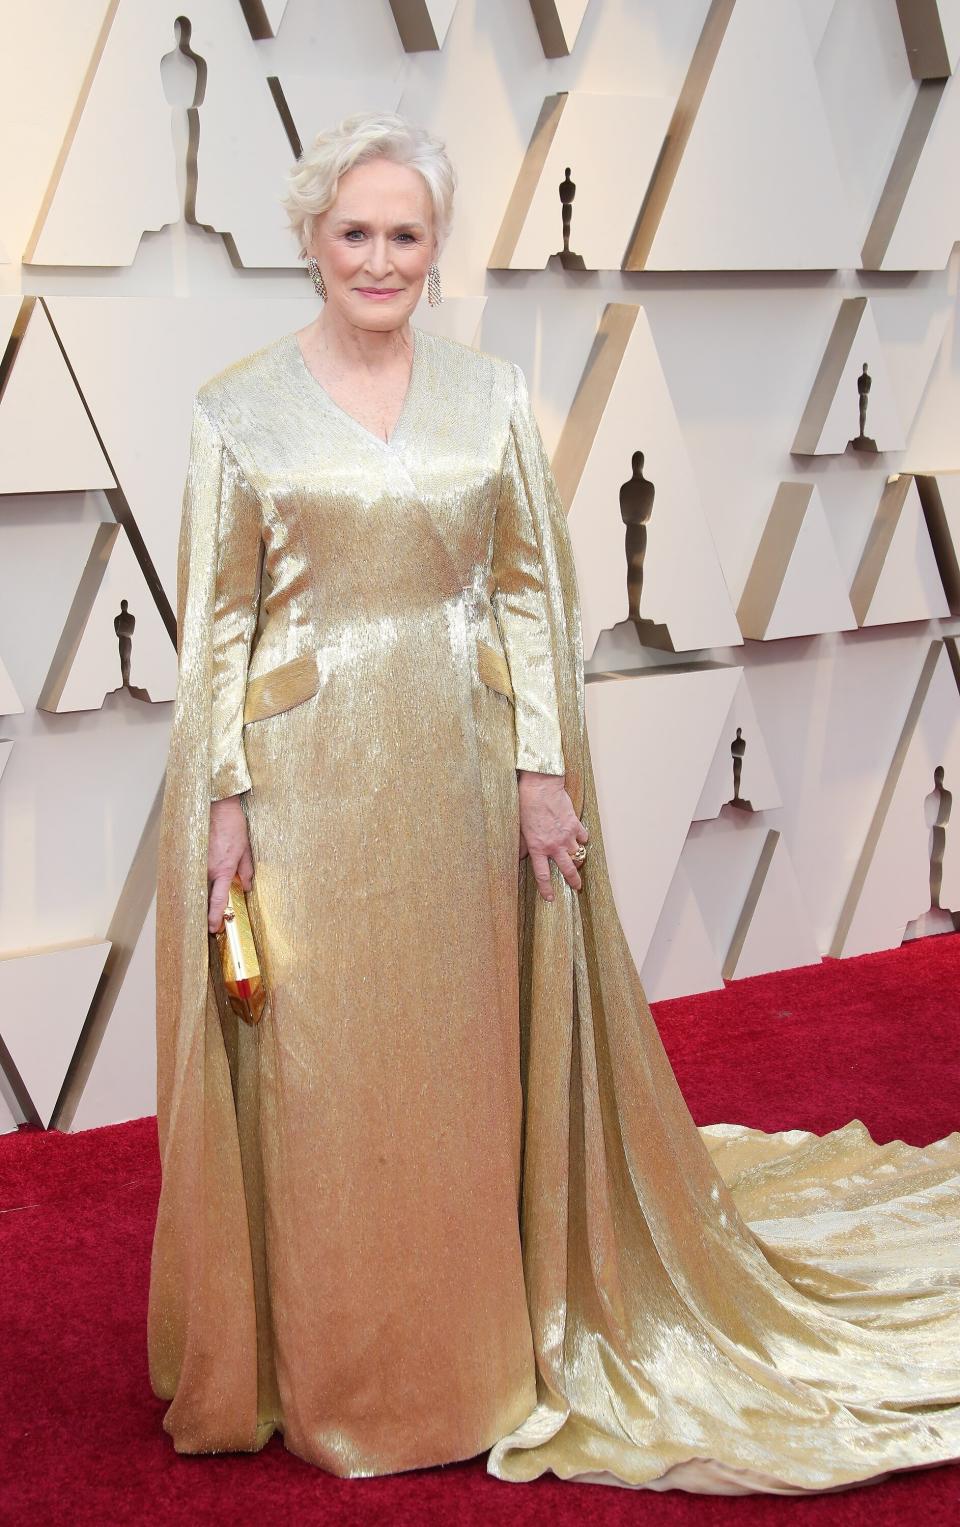 Glenn Close wears a gold gown featuring a cape at the 91st Annual Academy Awards. (Photo: Dan MacMedan/Getty Images)